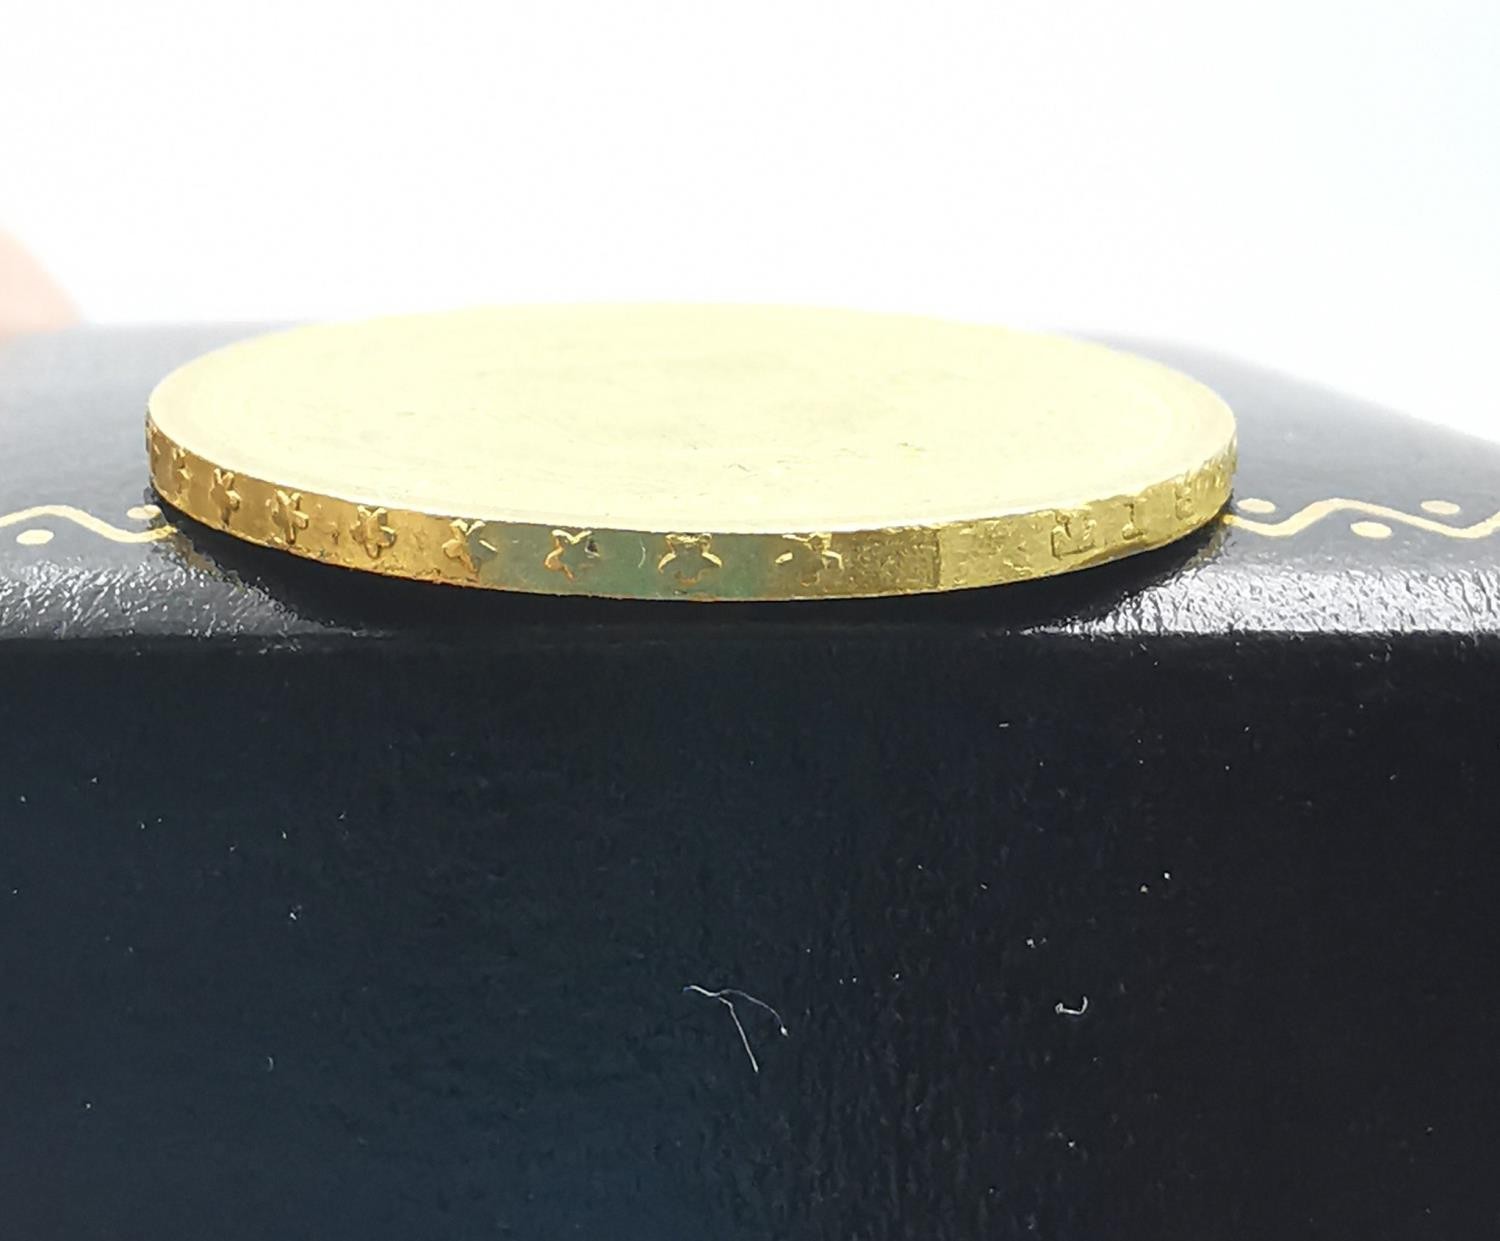 A 20F Swiss gold coin dated 1886. Diameter 2.1cm. Weight 6.44g - Image 3 of 5